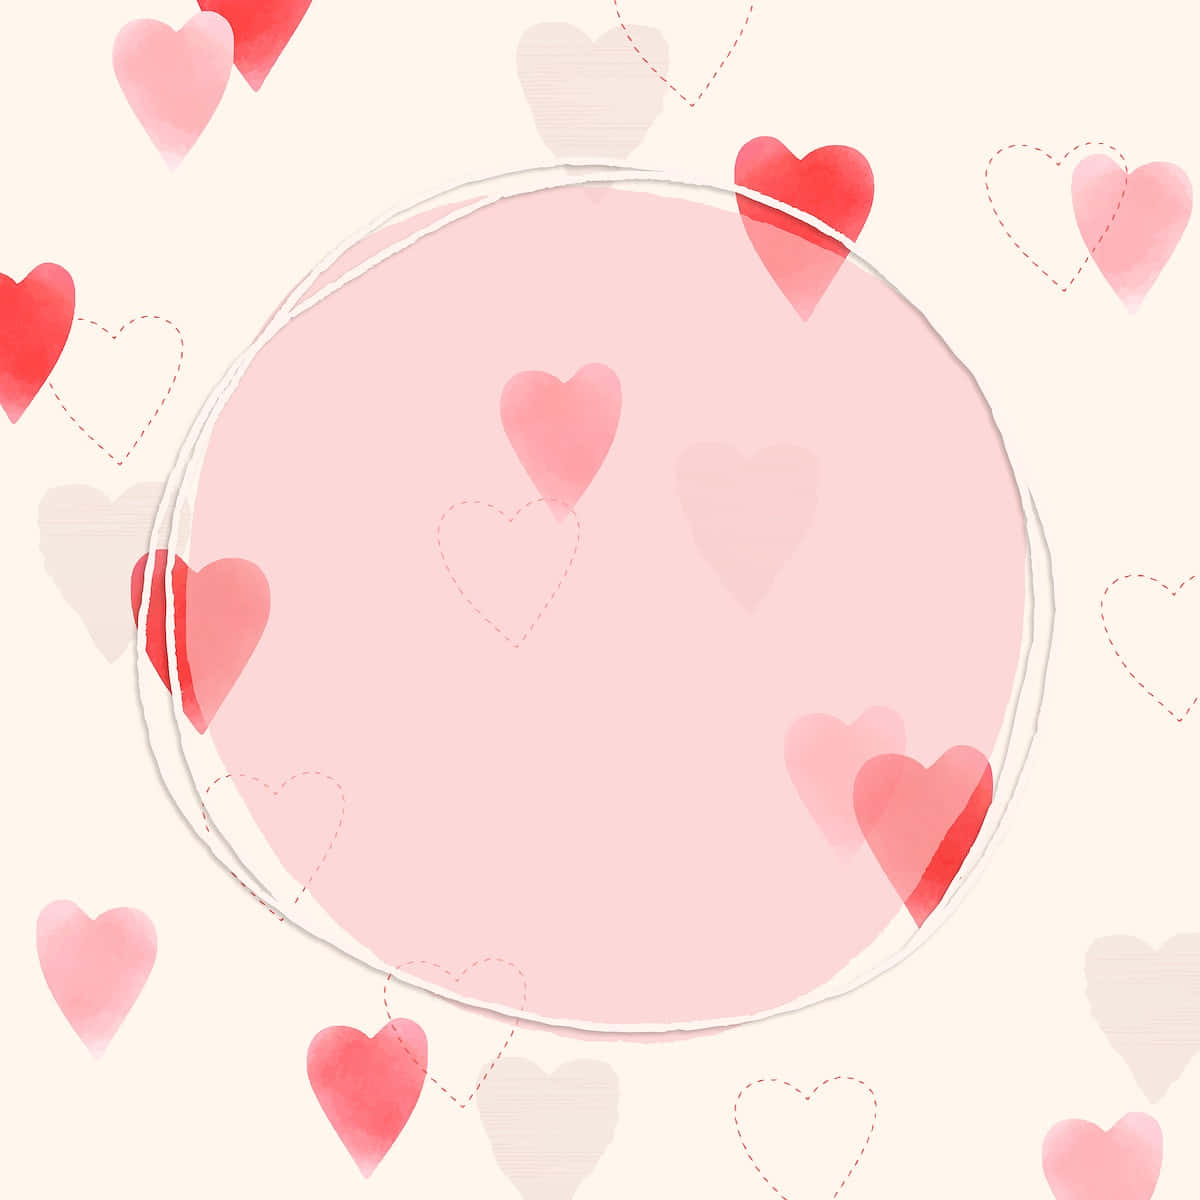 Pastel Circle With Heart Valentine's Day Pictures 1200 x 1200 Picture